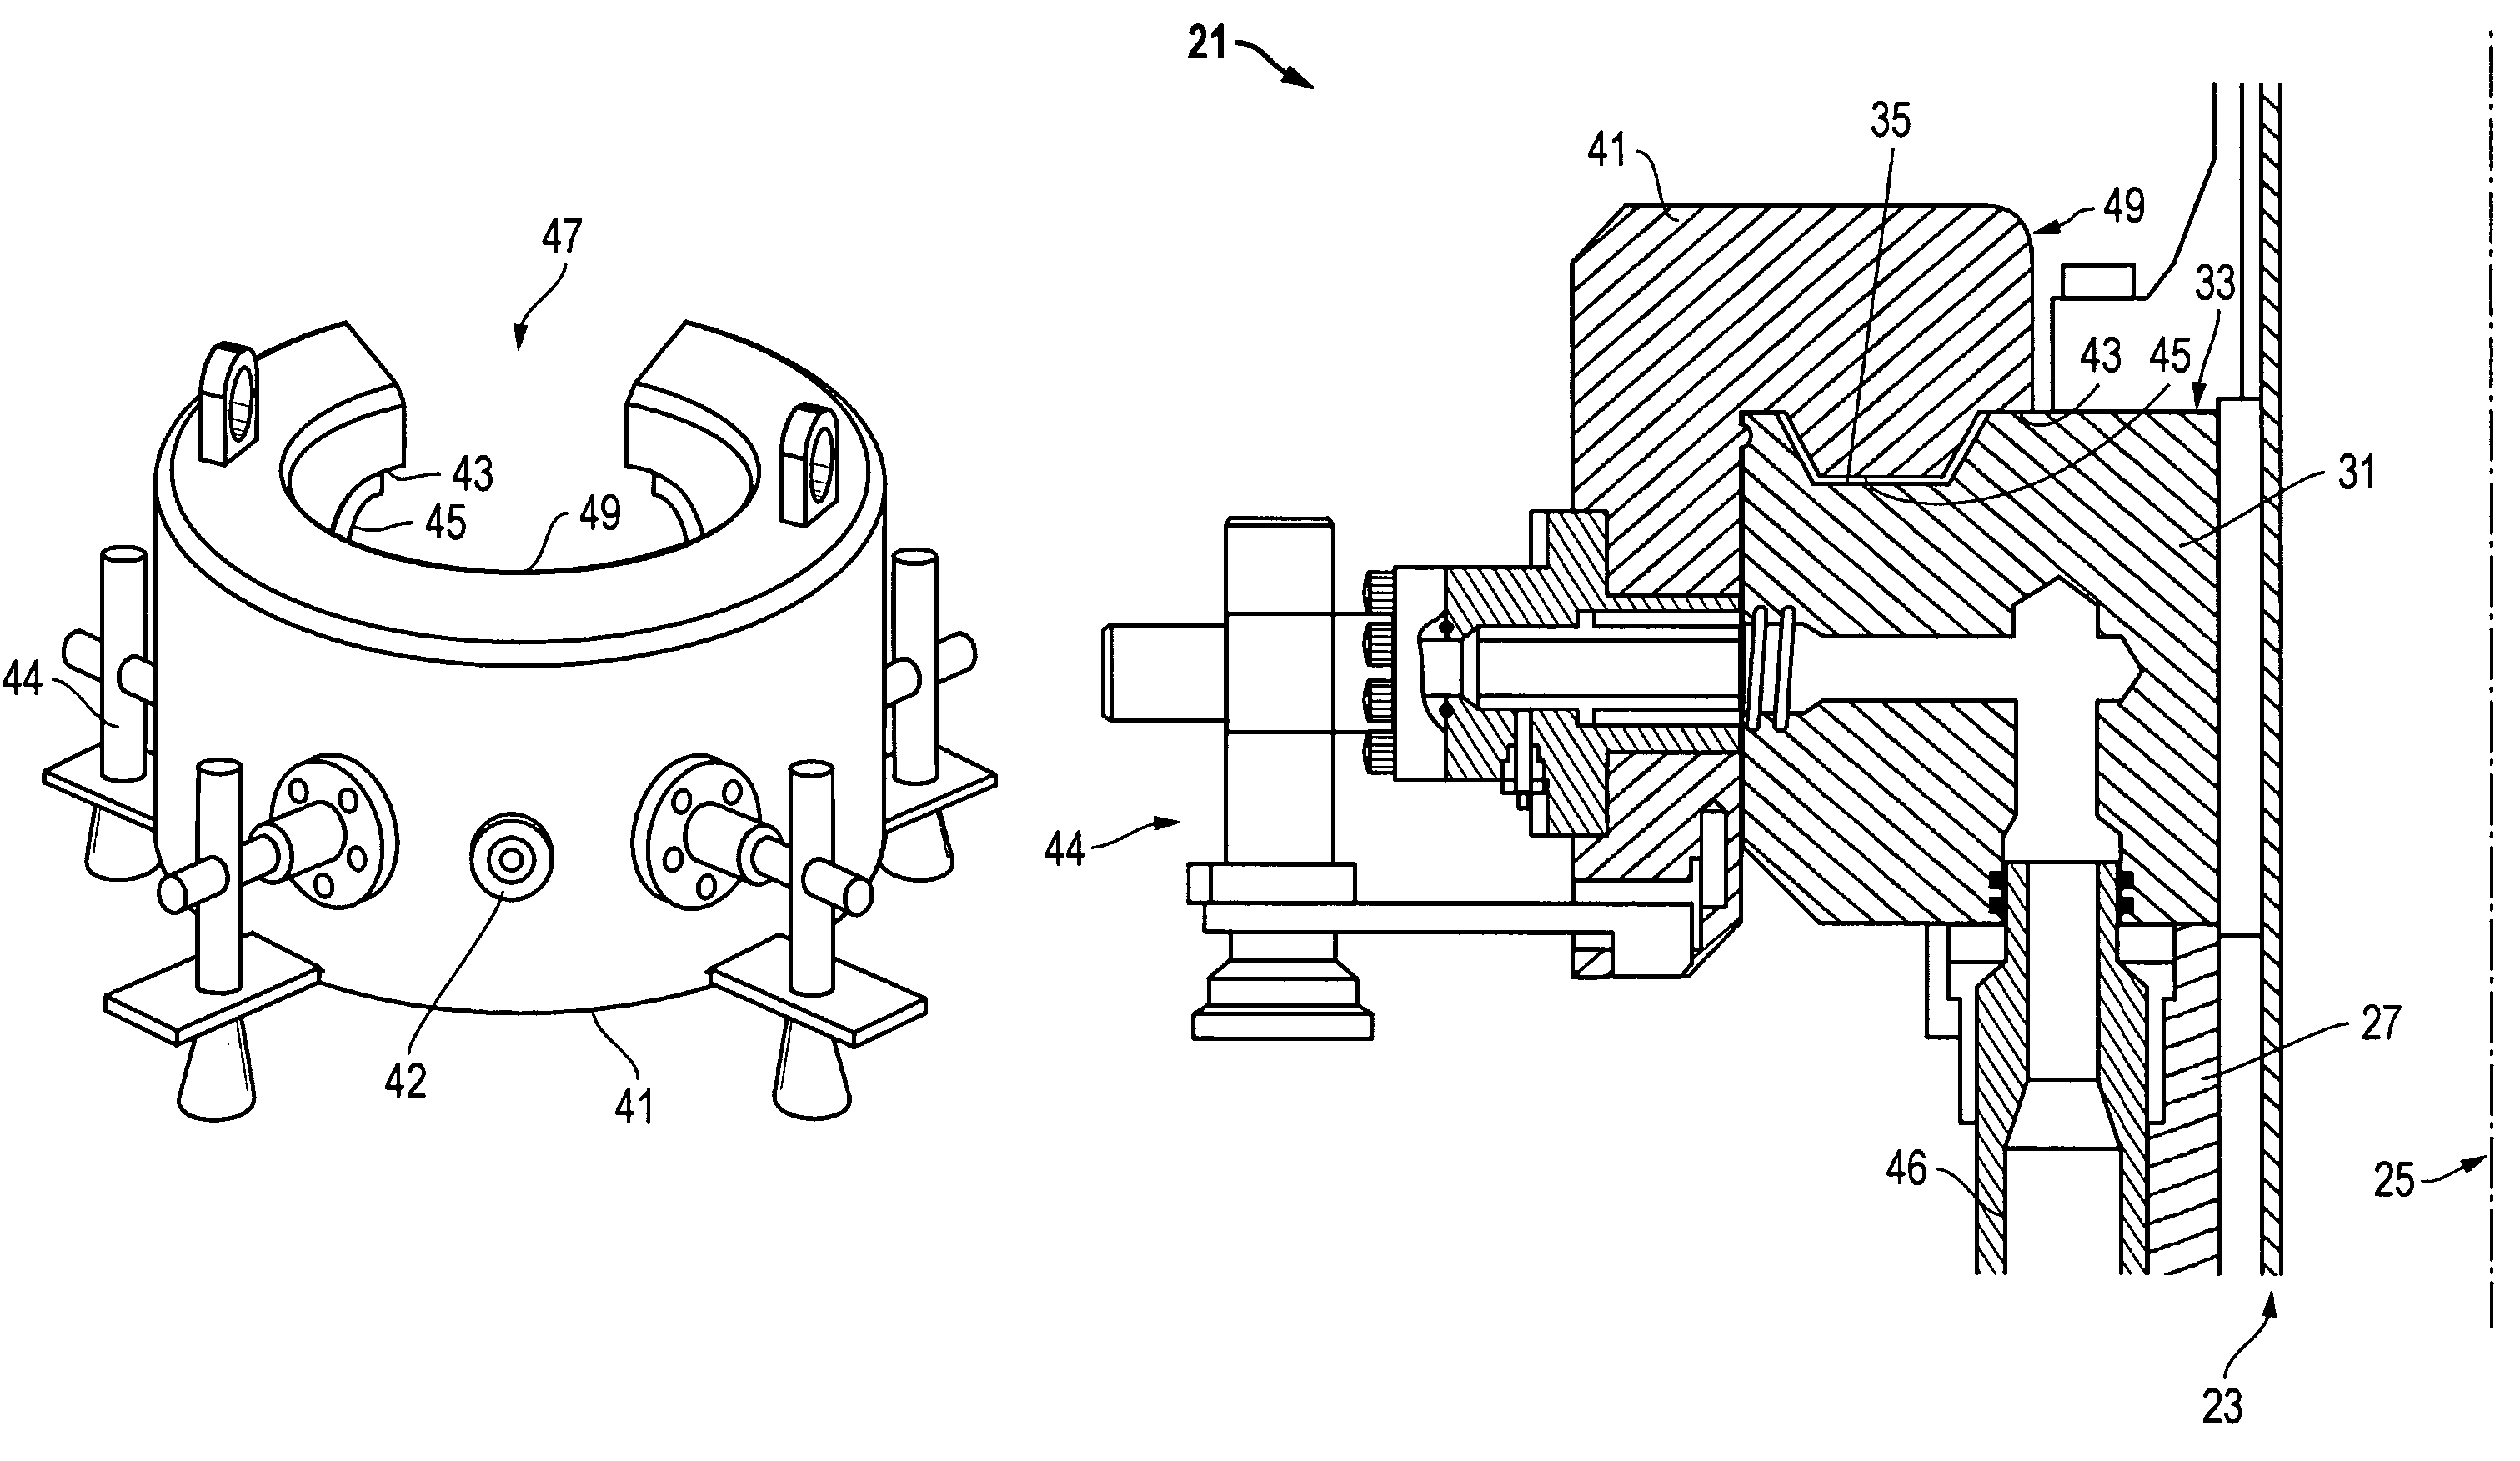 System, method, and apparatus for a radially-movable line termination system for a riser string on a drilling rig